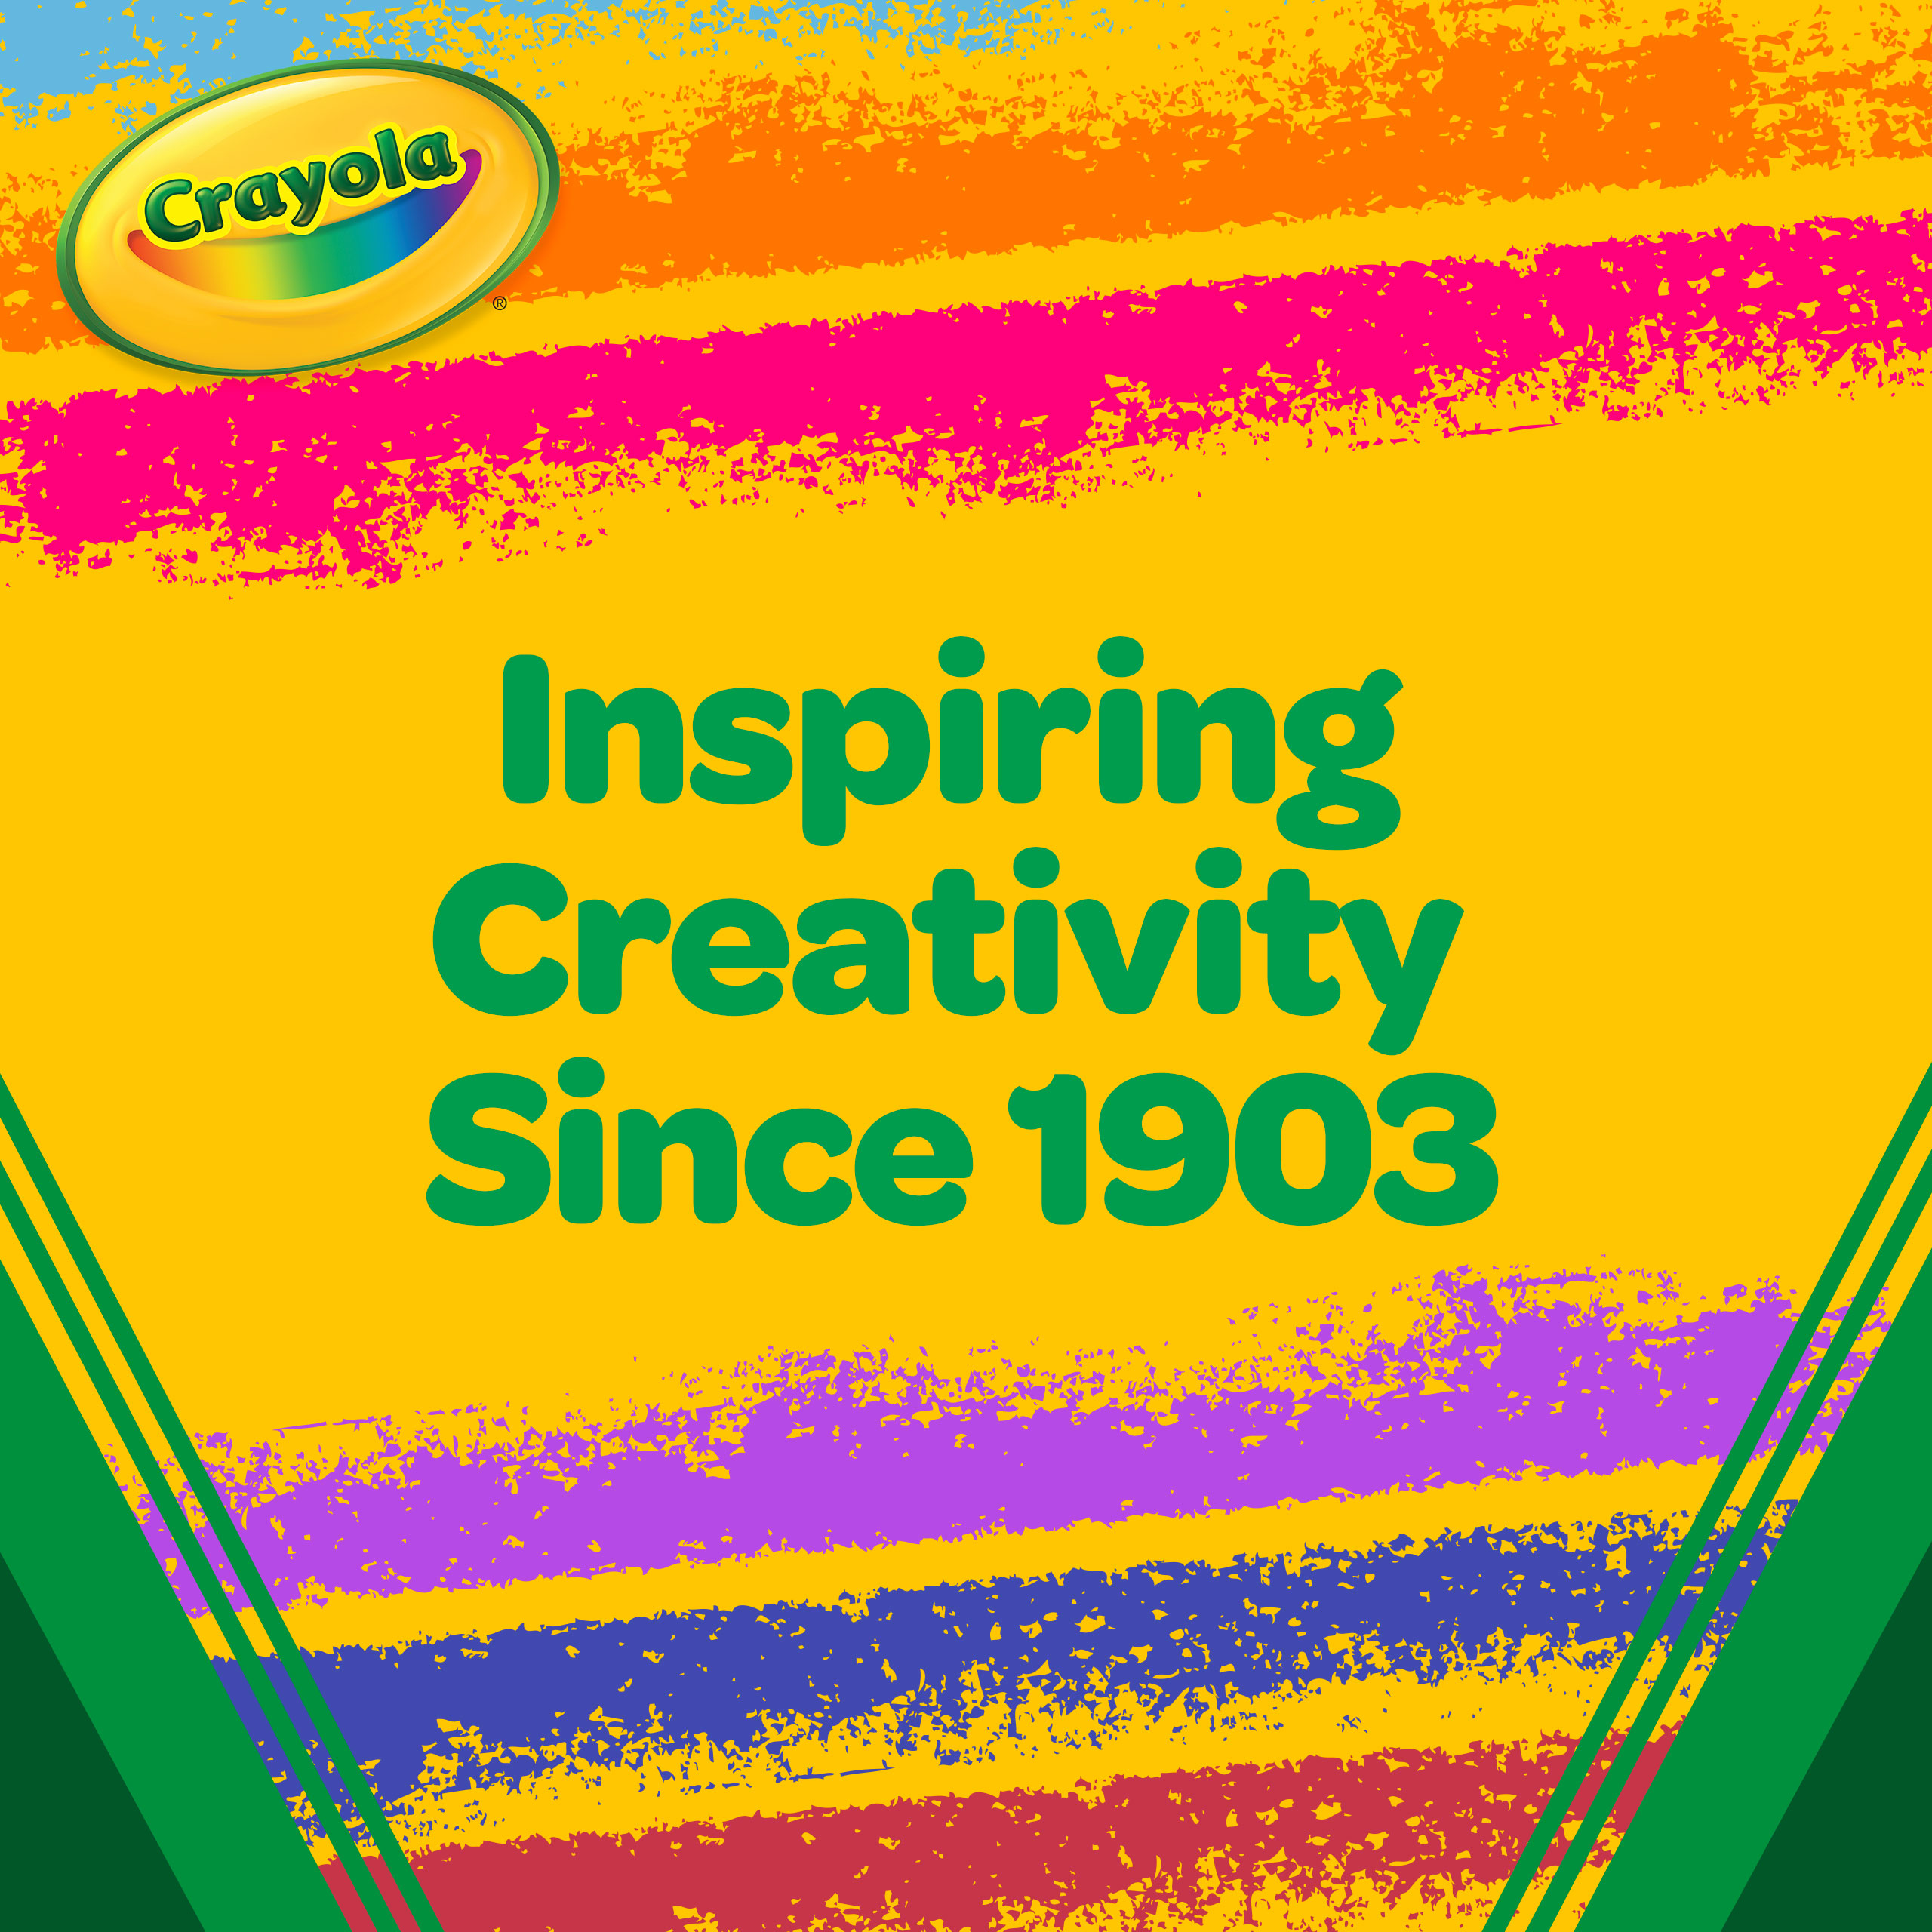 Crayola Construction Colored Paper in 10 Colors, School Supplies for Kindergarten, 120 Pcs, Child - image 8 of 11